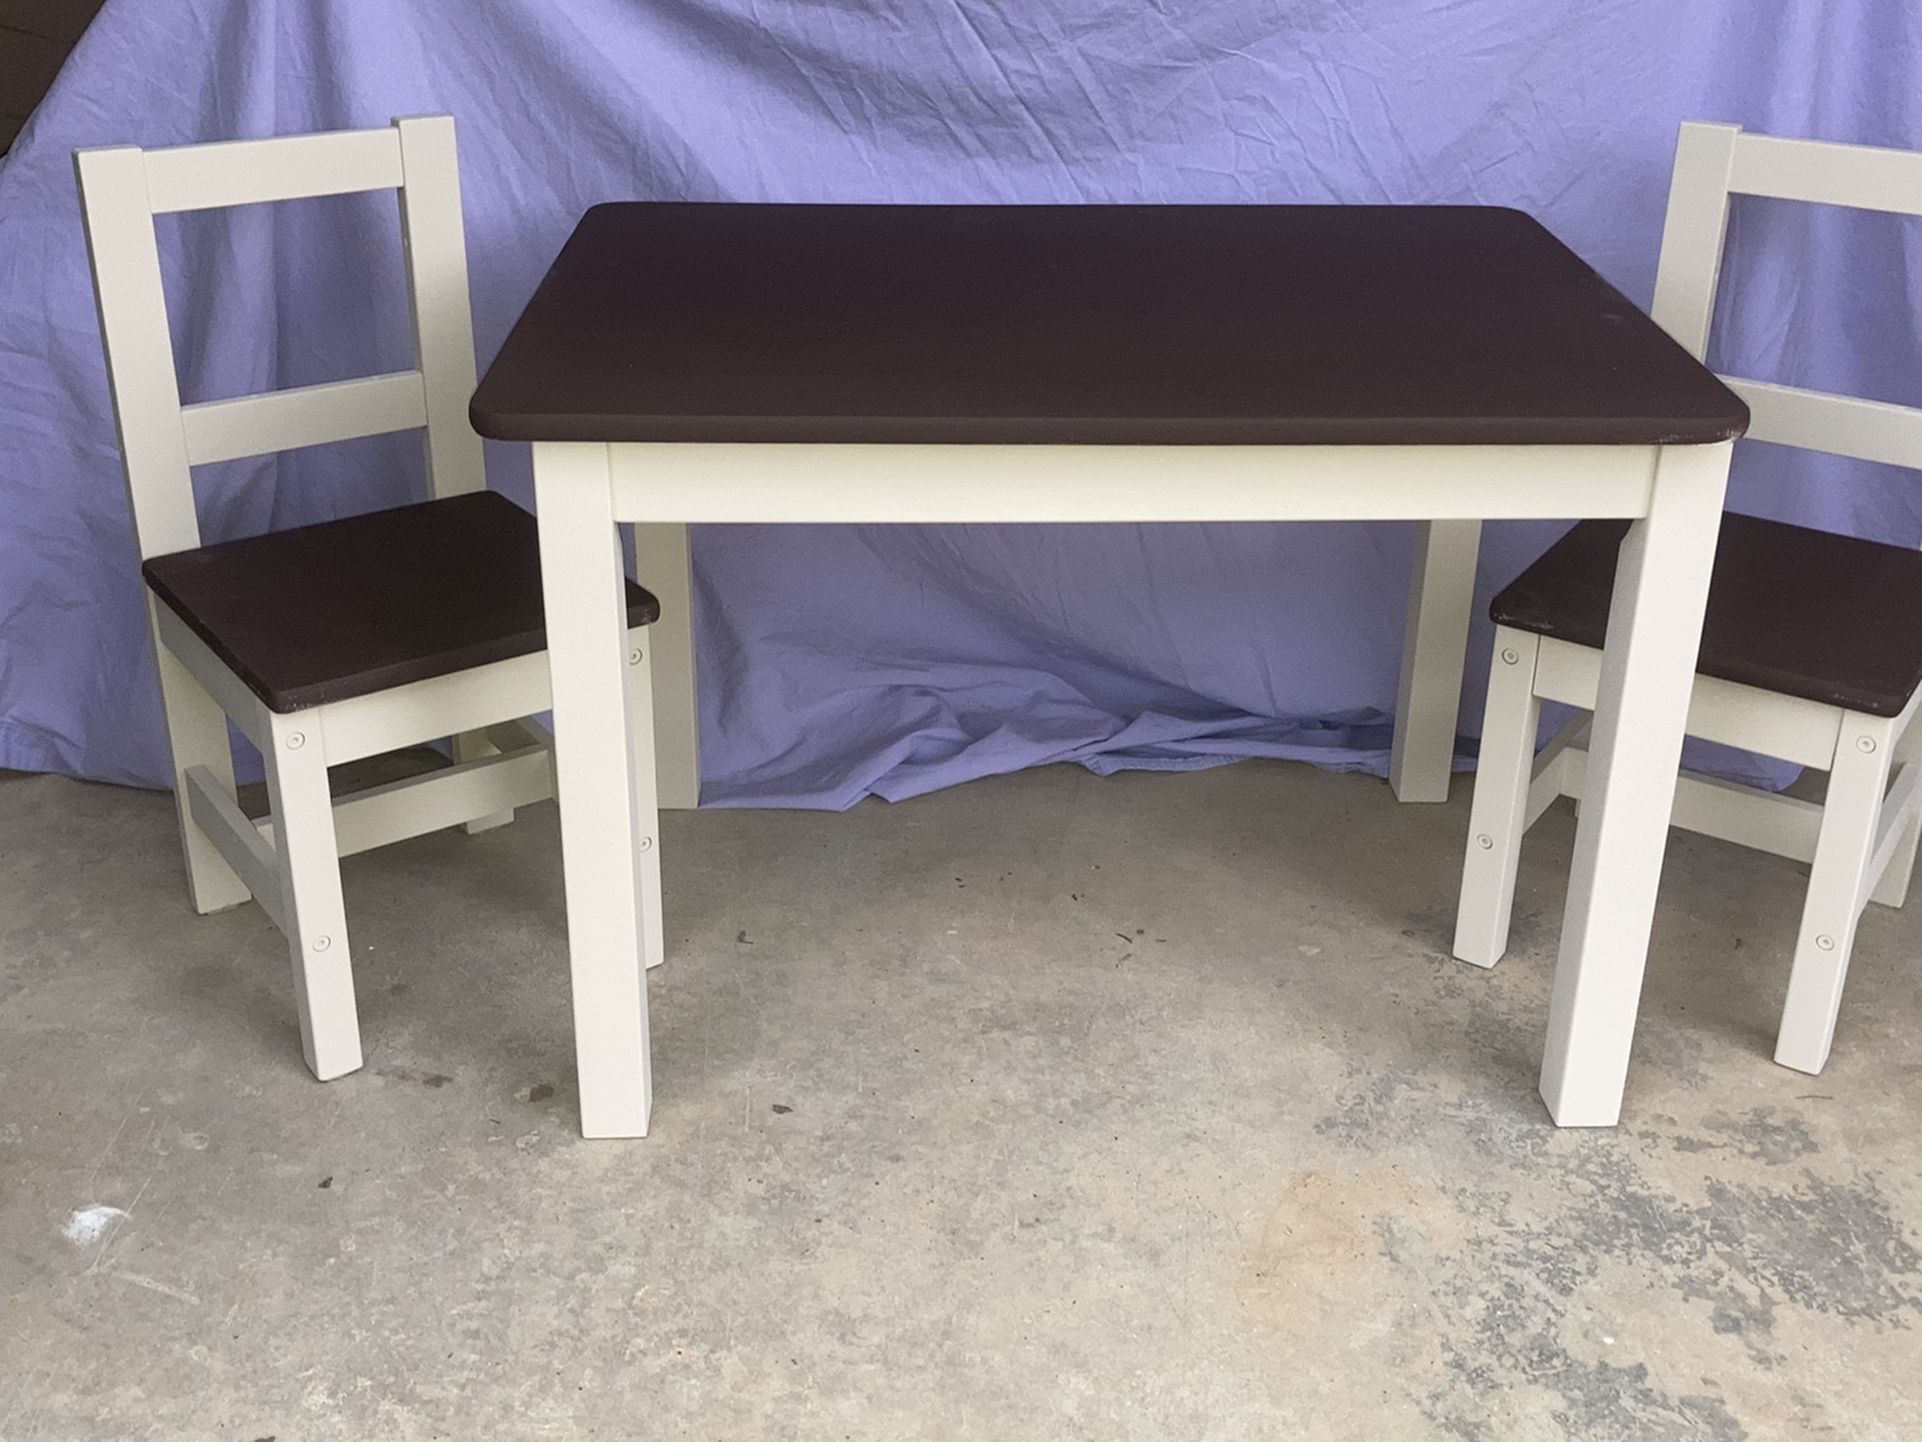 Large Kid’s Farmhouse Style Table and Chairs (2) in Tan and Dark Brown- refurbished